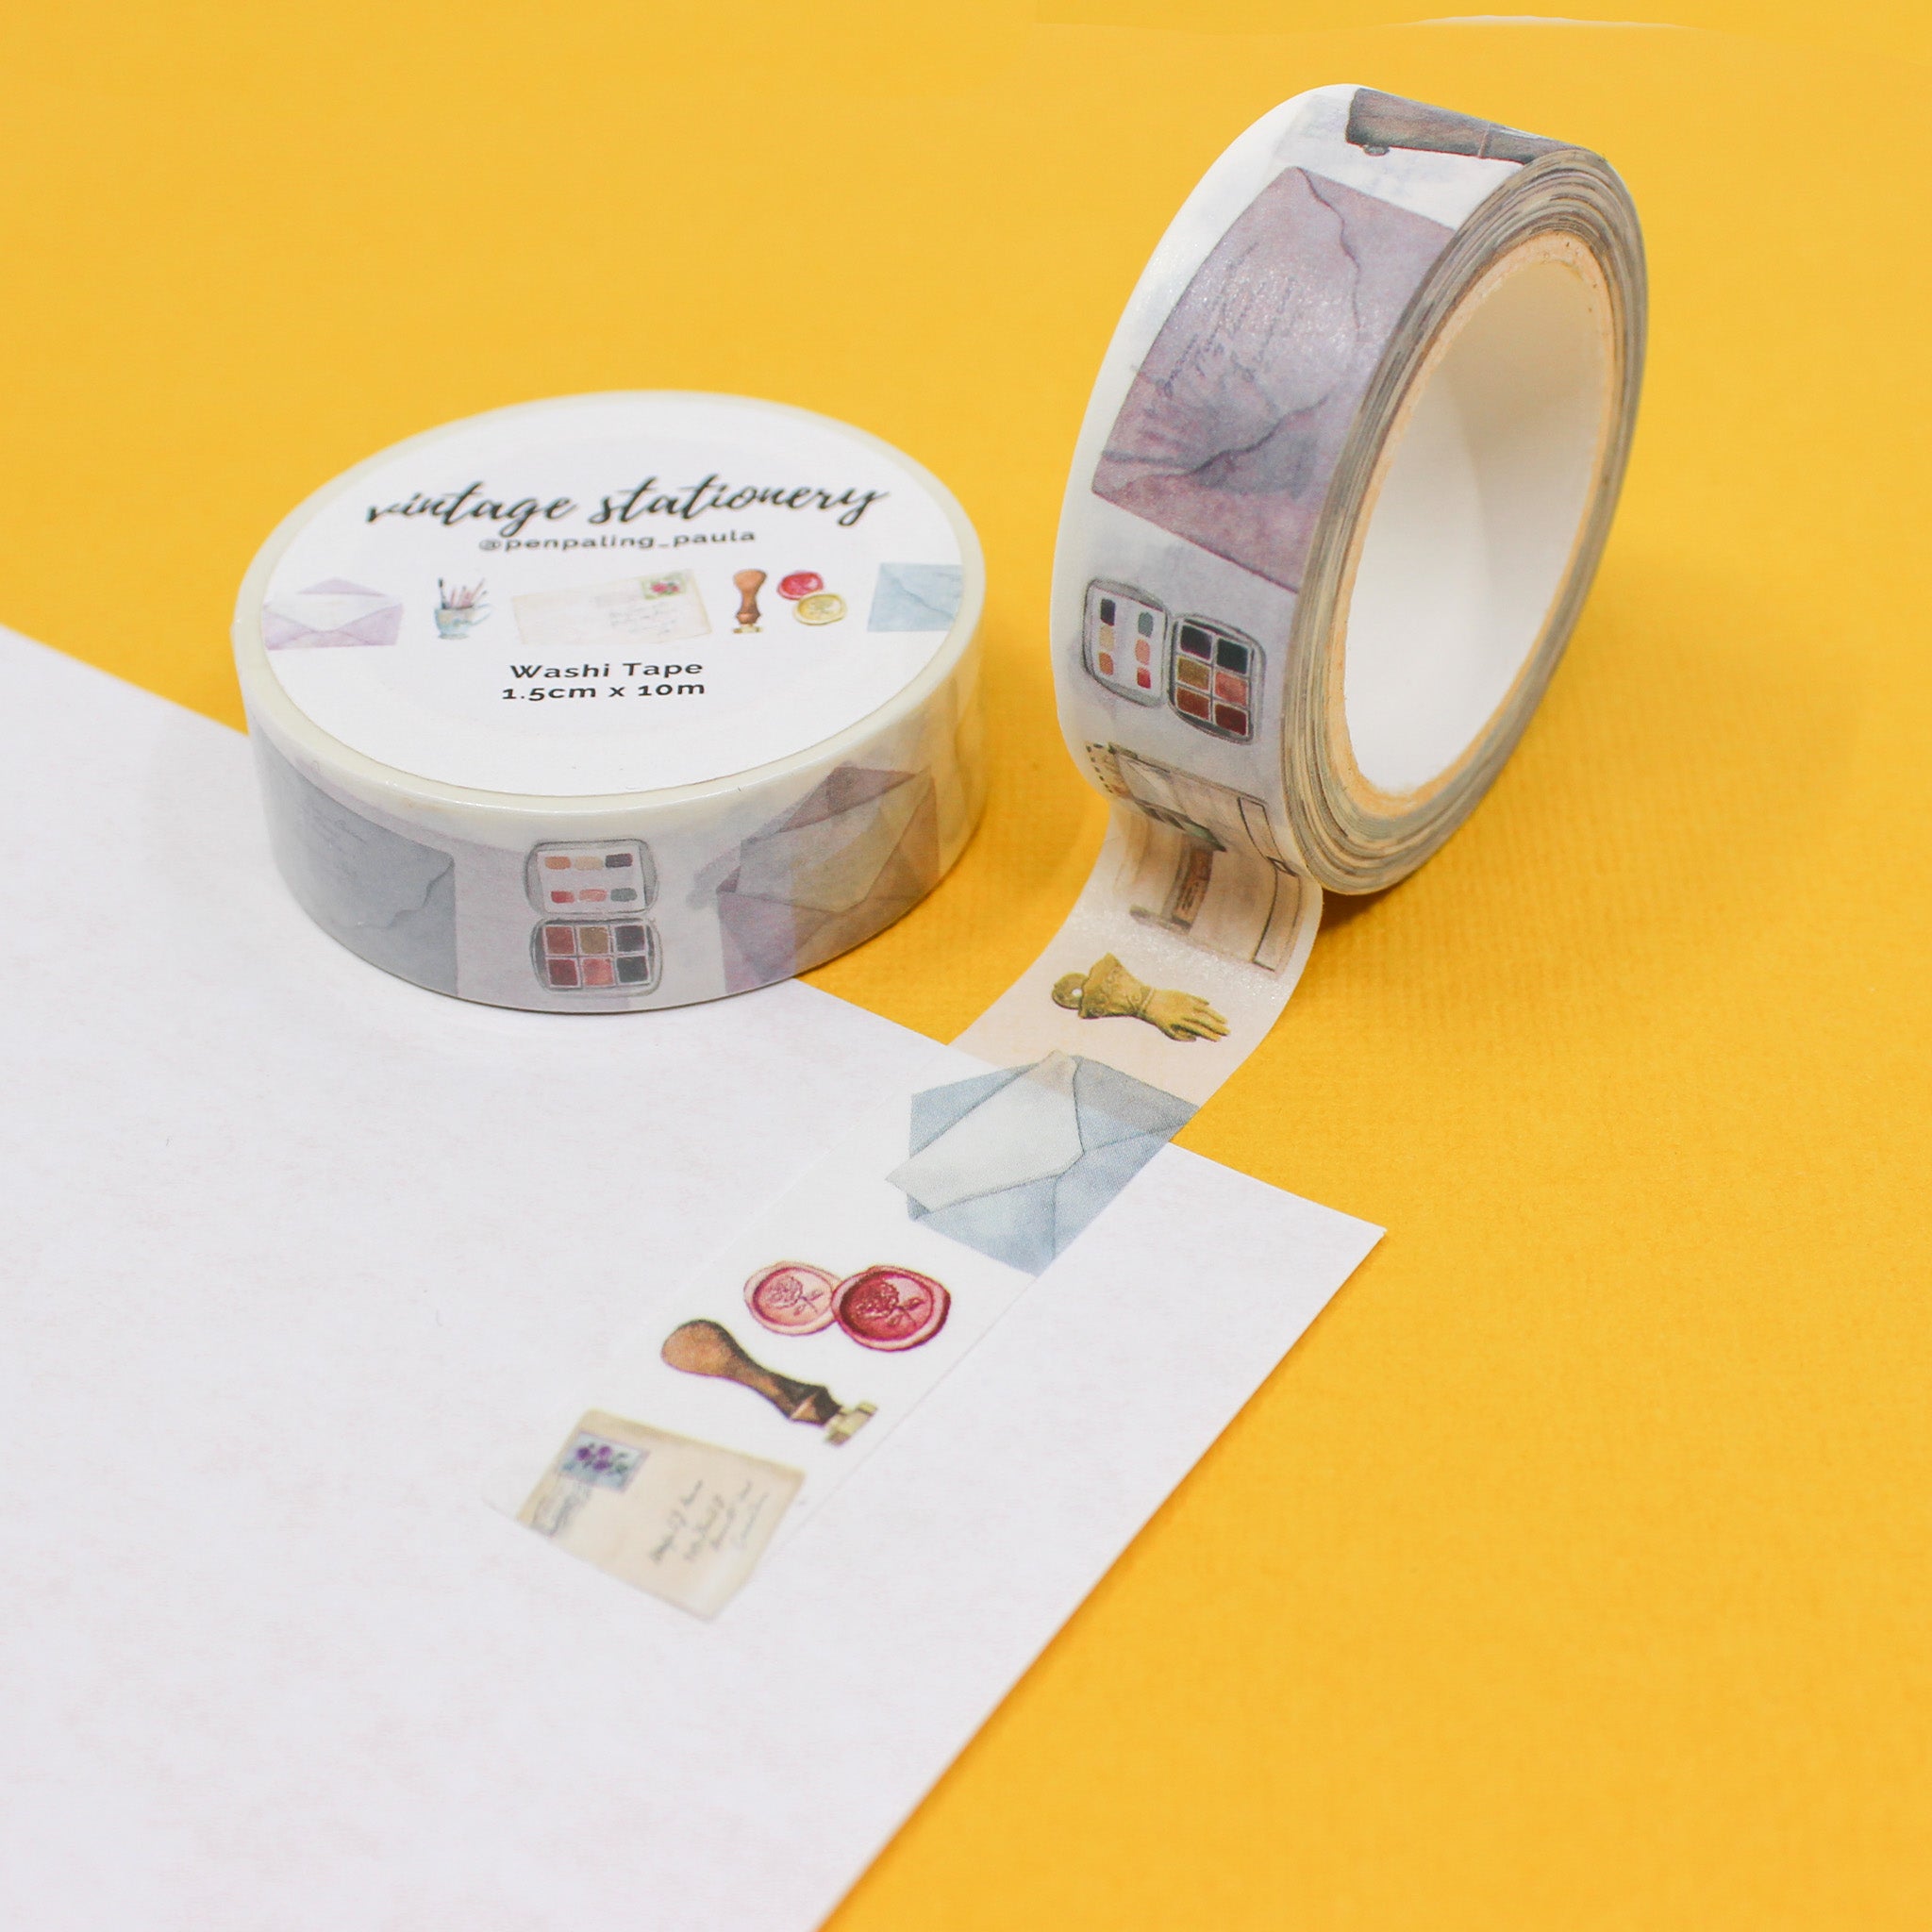 This is a vintage stationary pattern washi tape from BBB Supplies Craft Shop